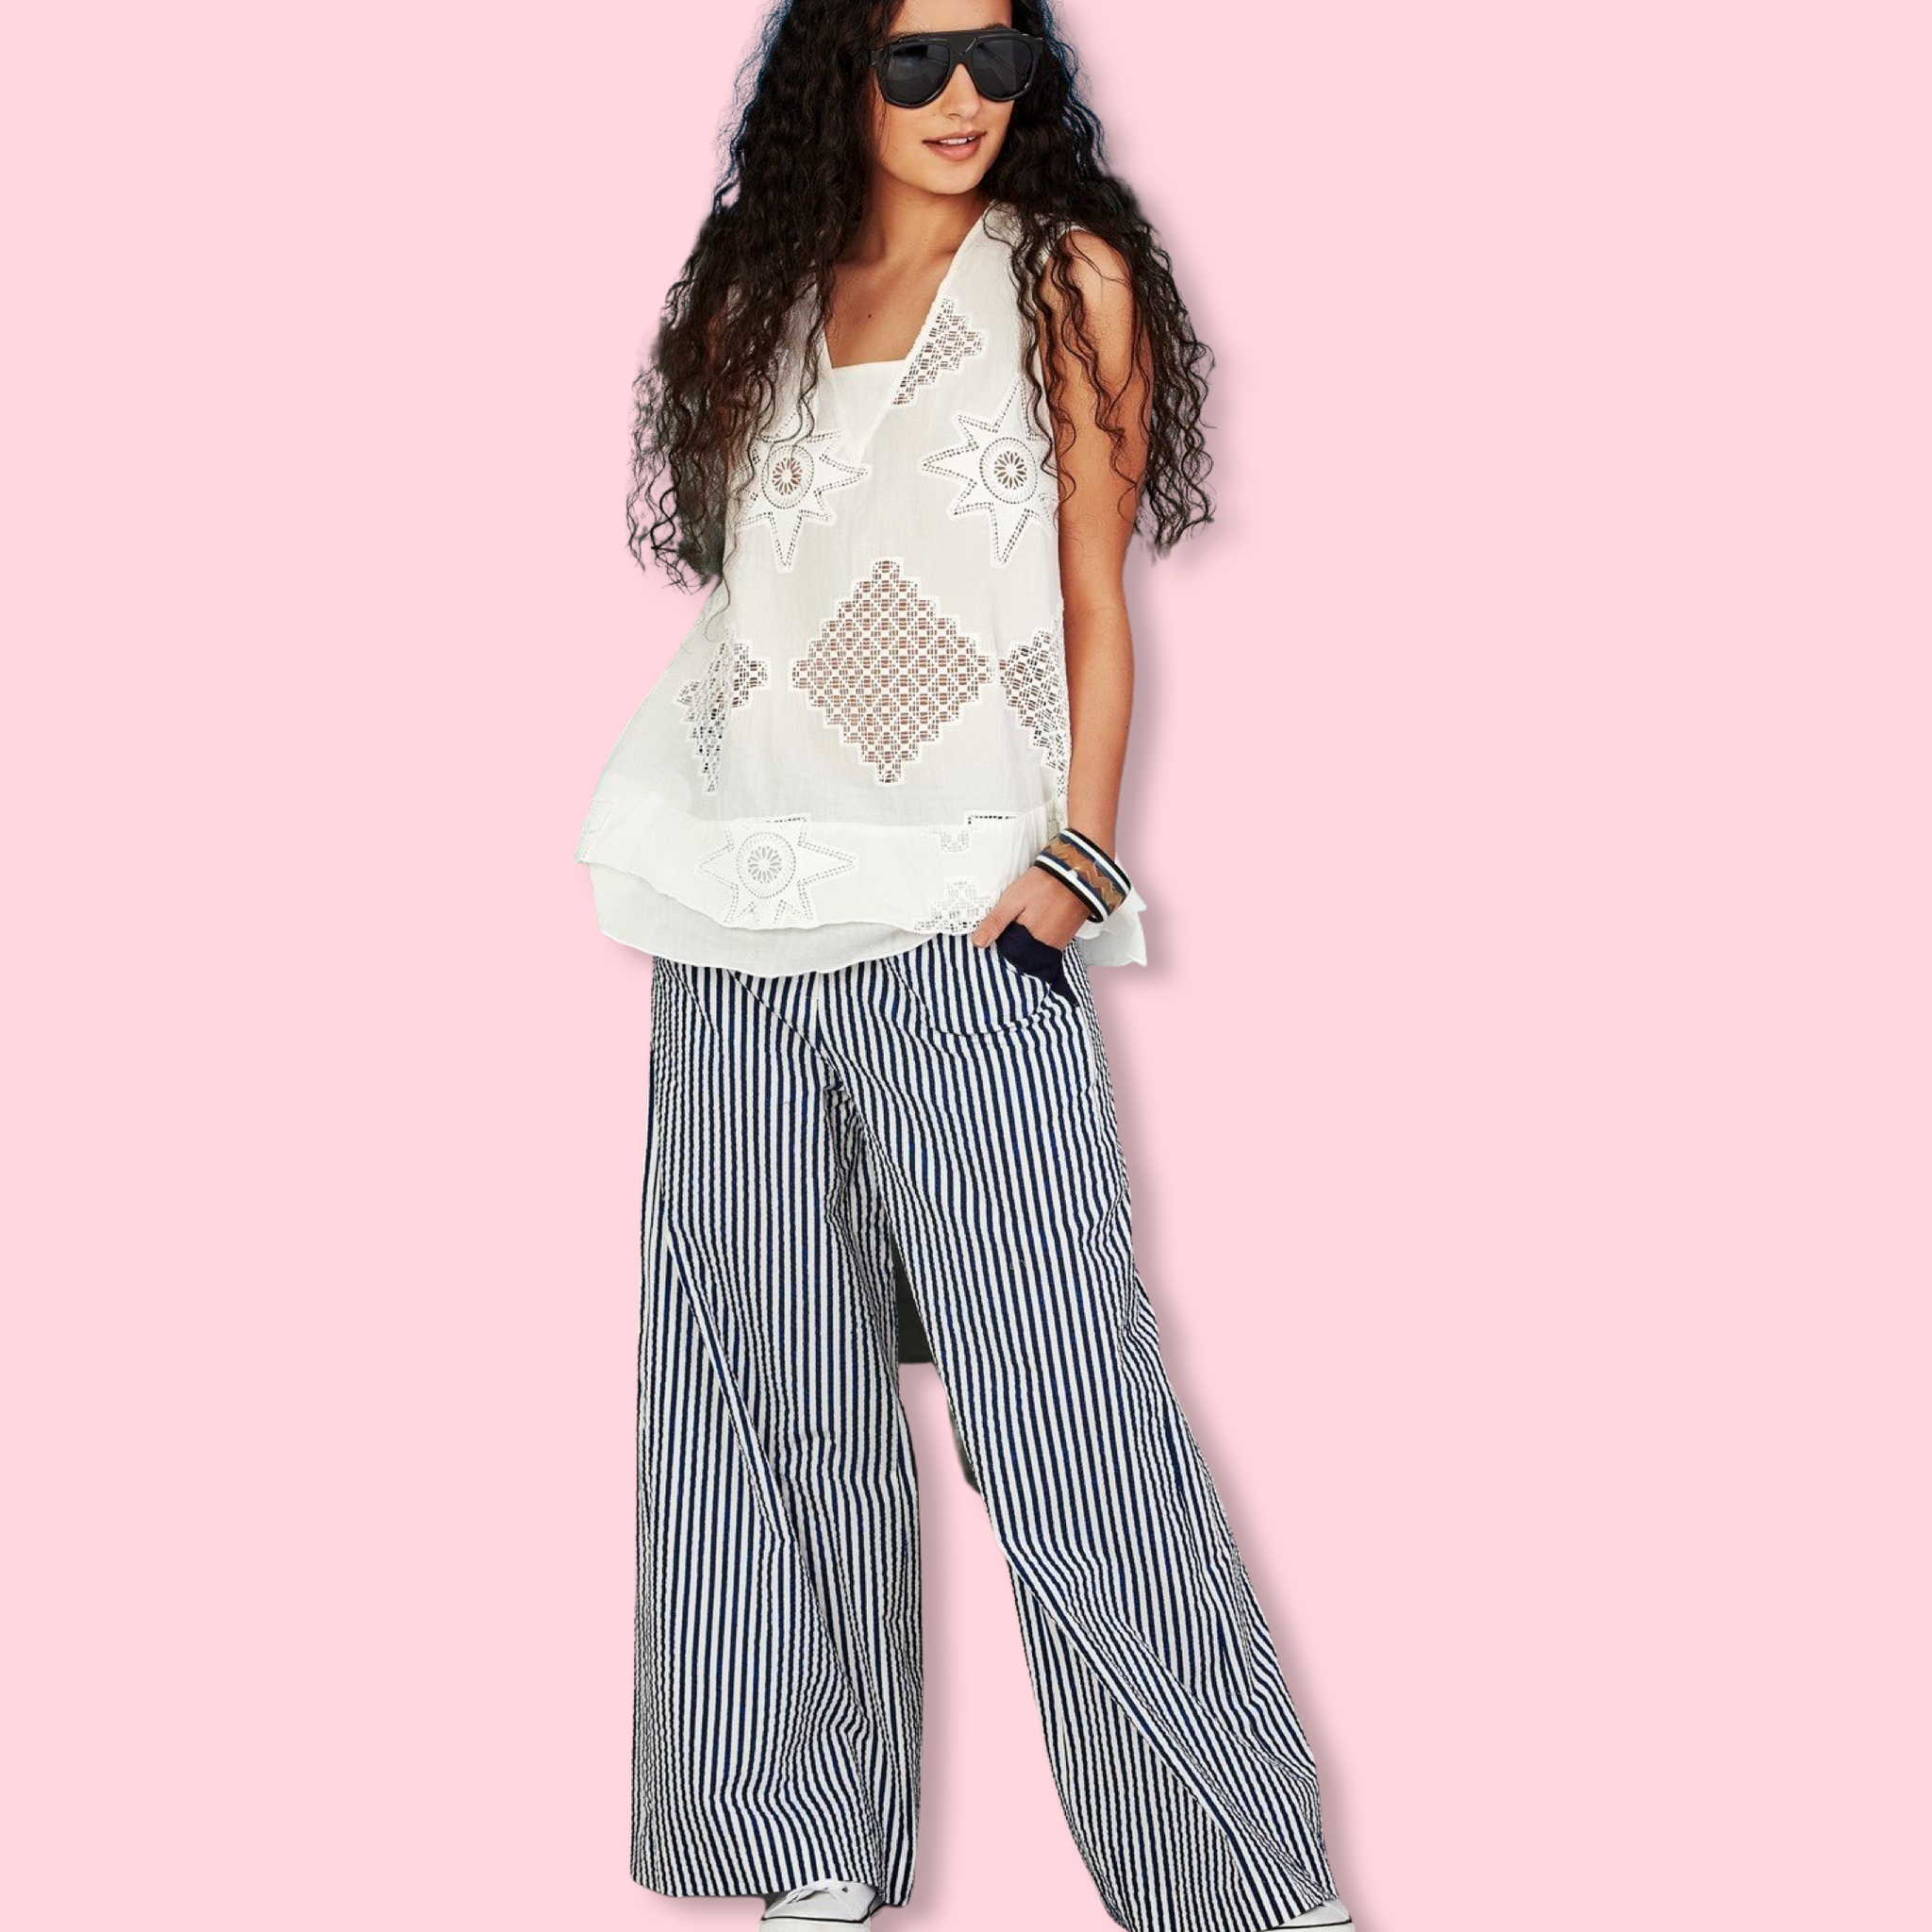 Cooper Down the Line Pants - Blue White Stripe LUCKY LAST 12